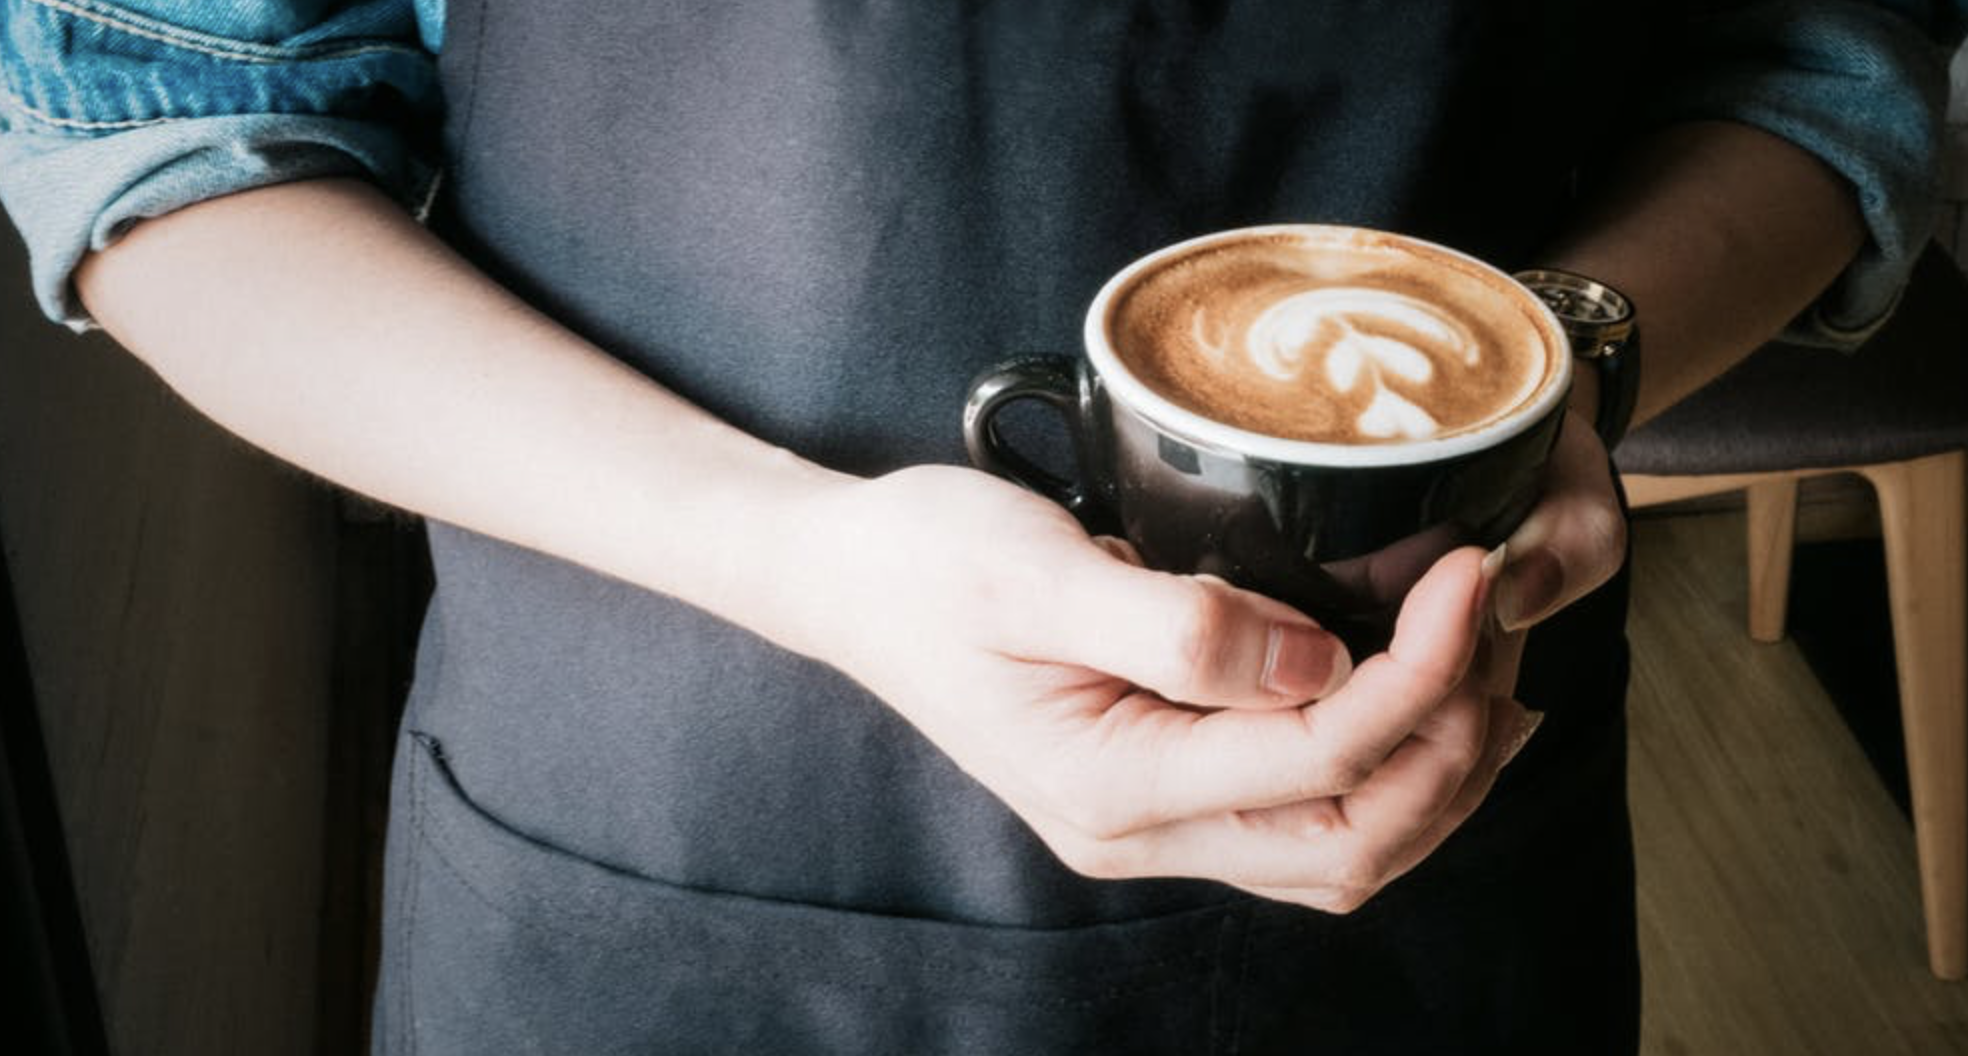 Where to Find the Best Coffee Shops in LA Near Qwil